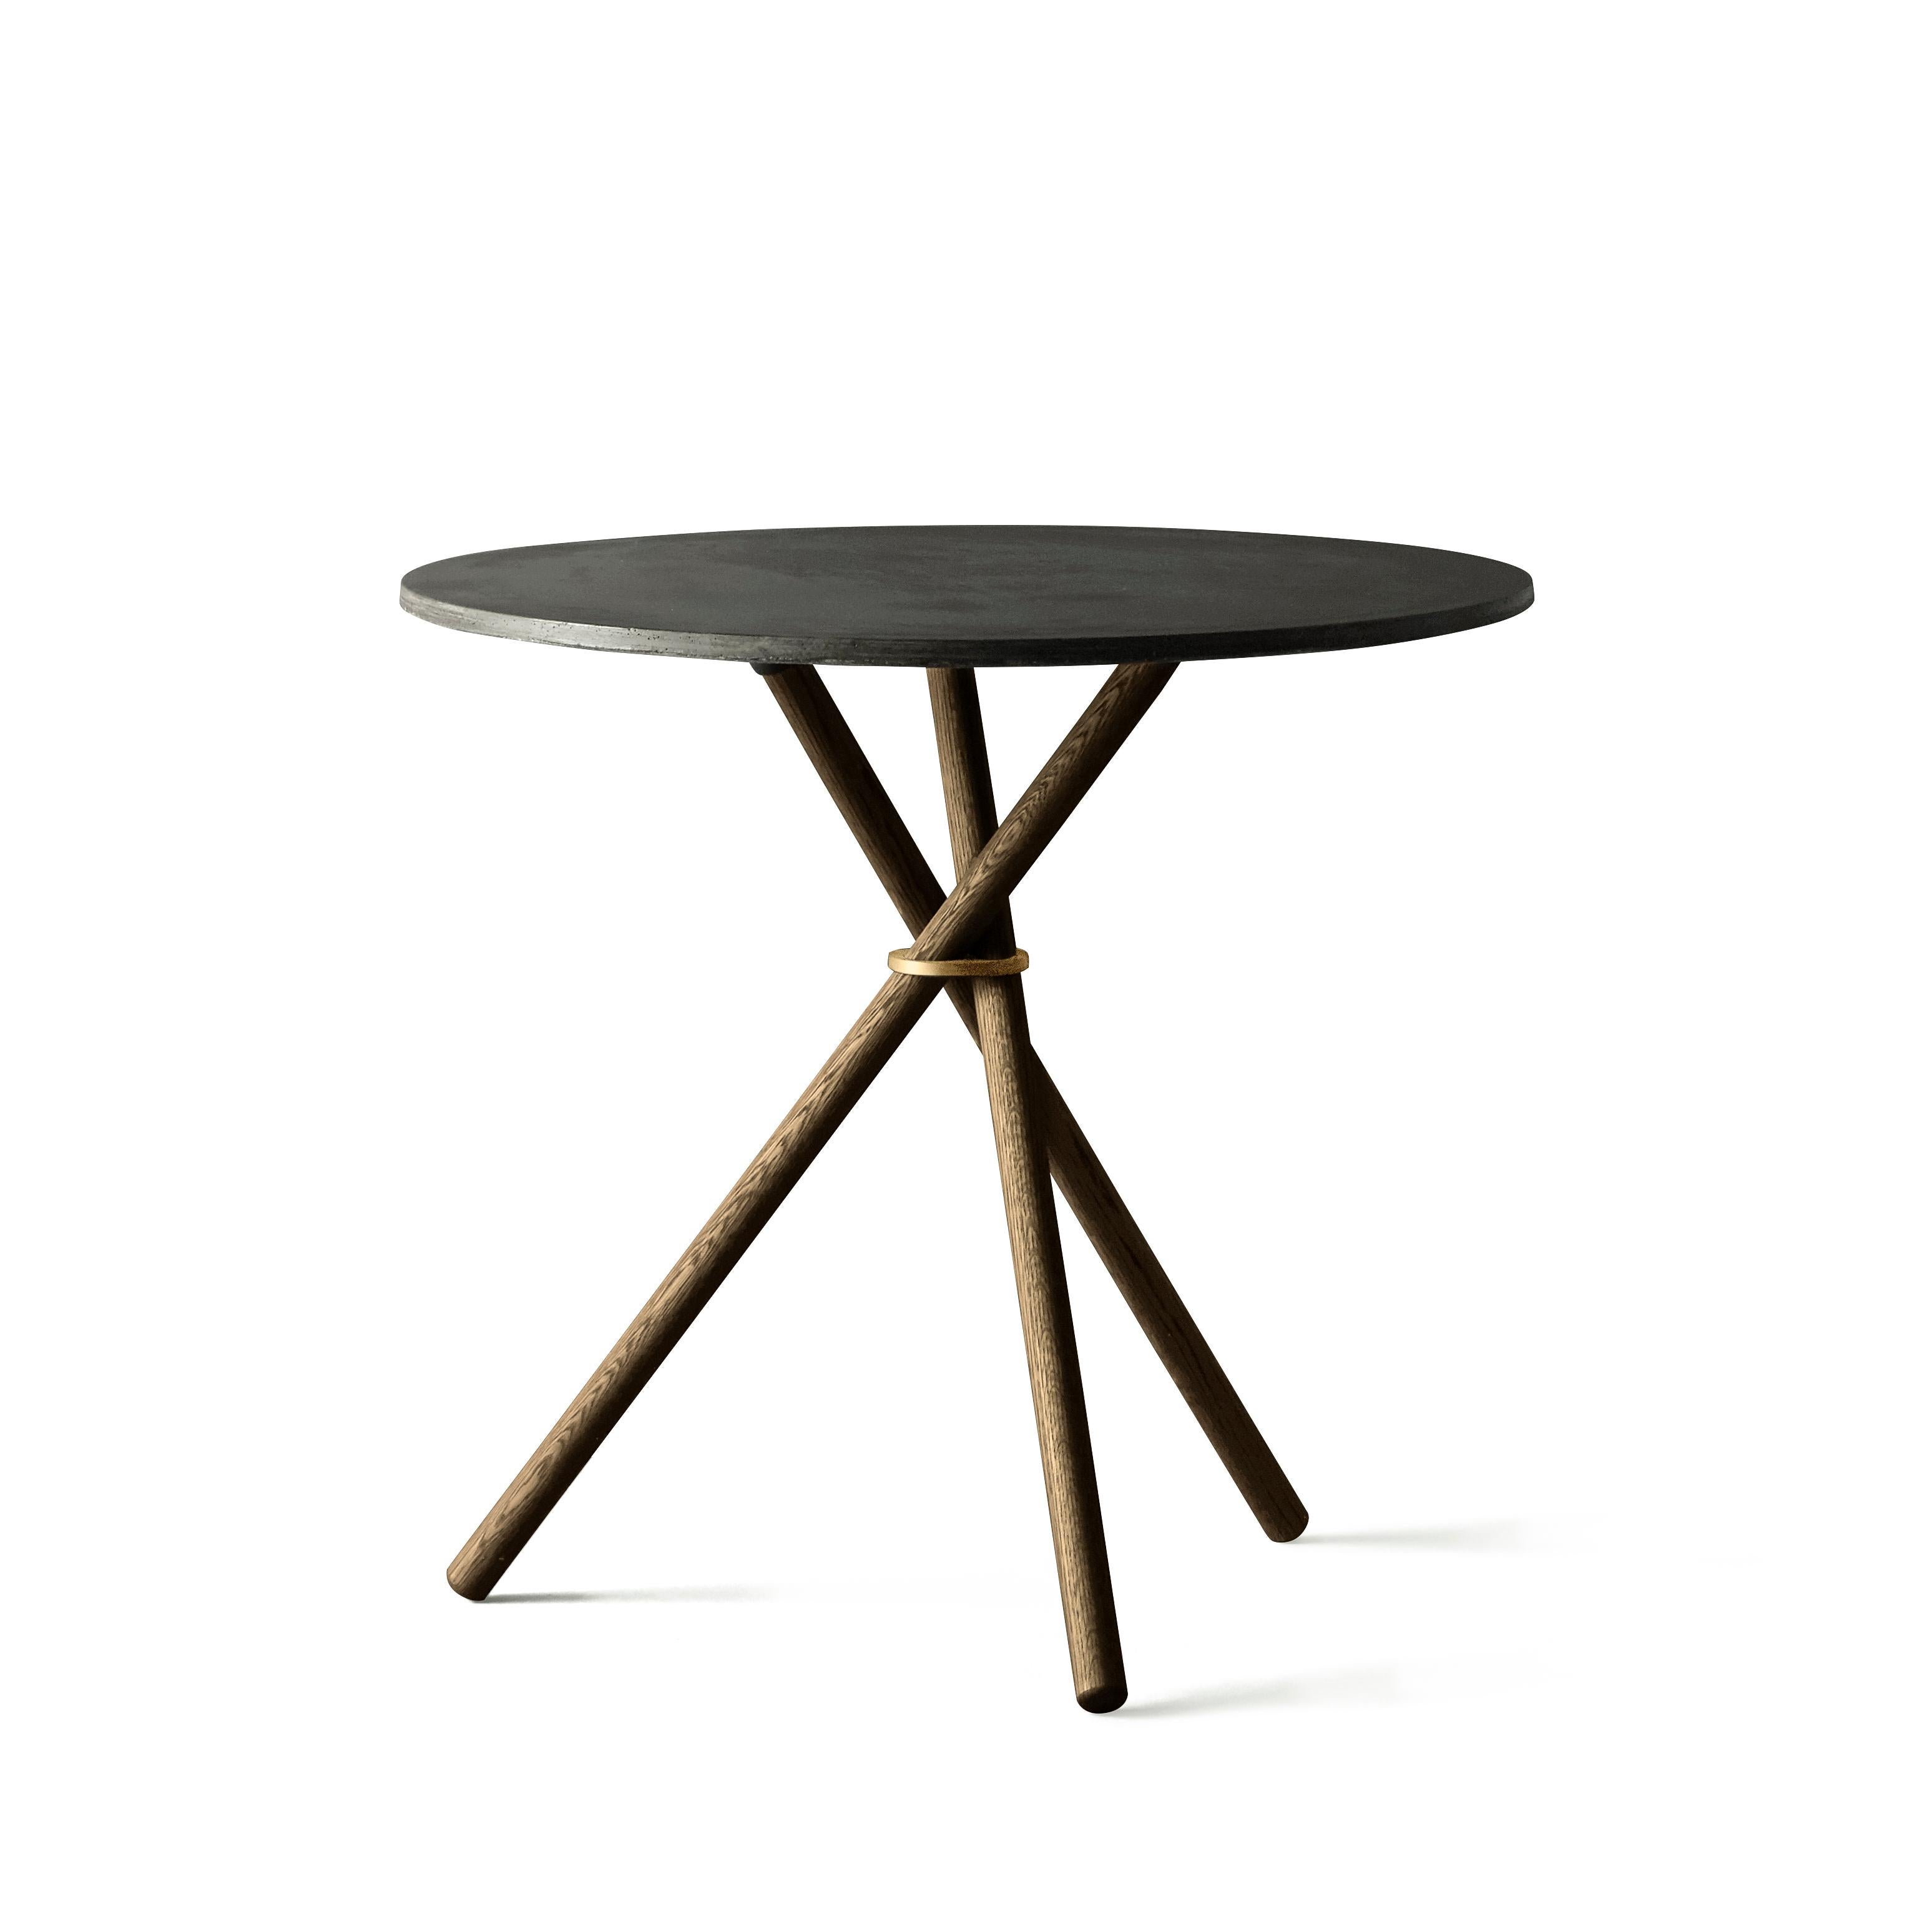 Designed to fit into most settings and works perfect as a small kitchen table. The table is constructed by three sub elements: The assembly ring, wooden legs and table top in either concrete, oak or birch, allowing it to suit a range of